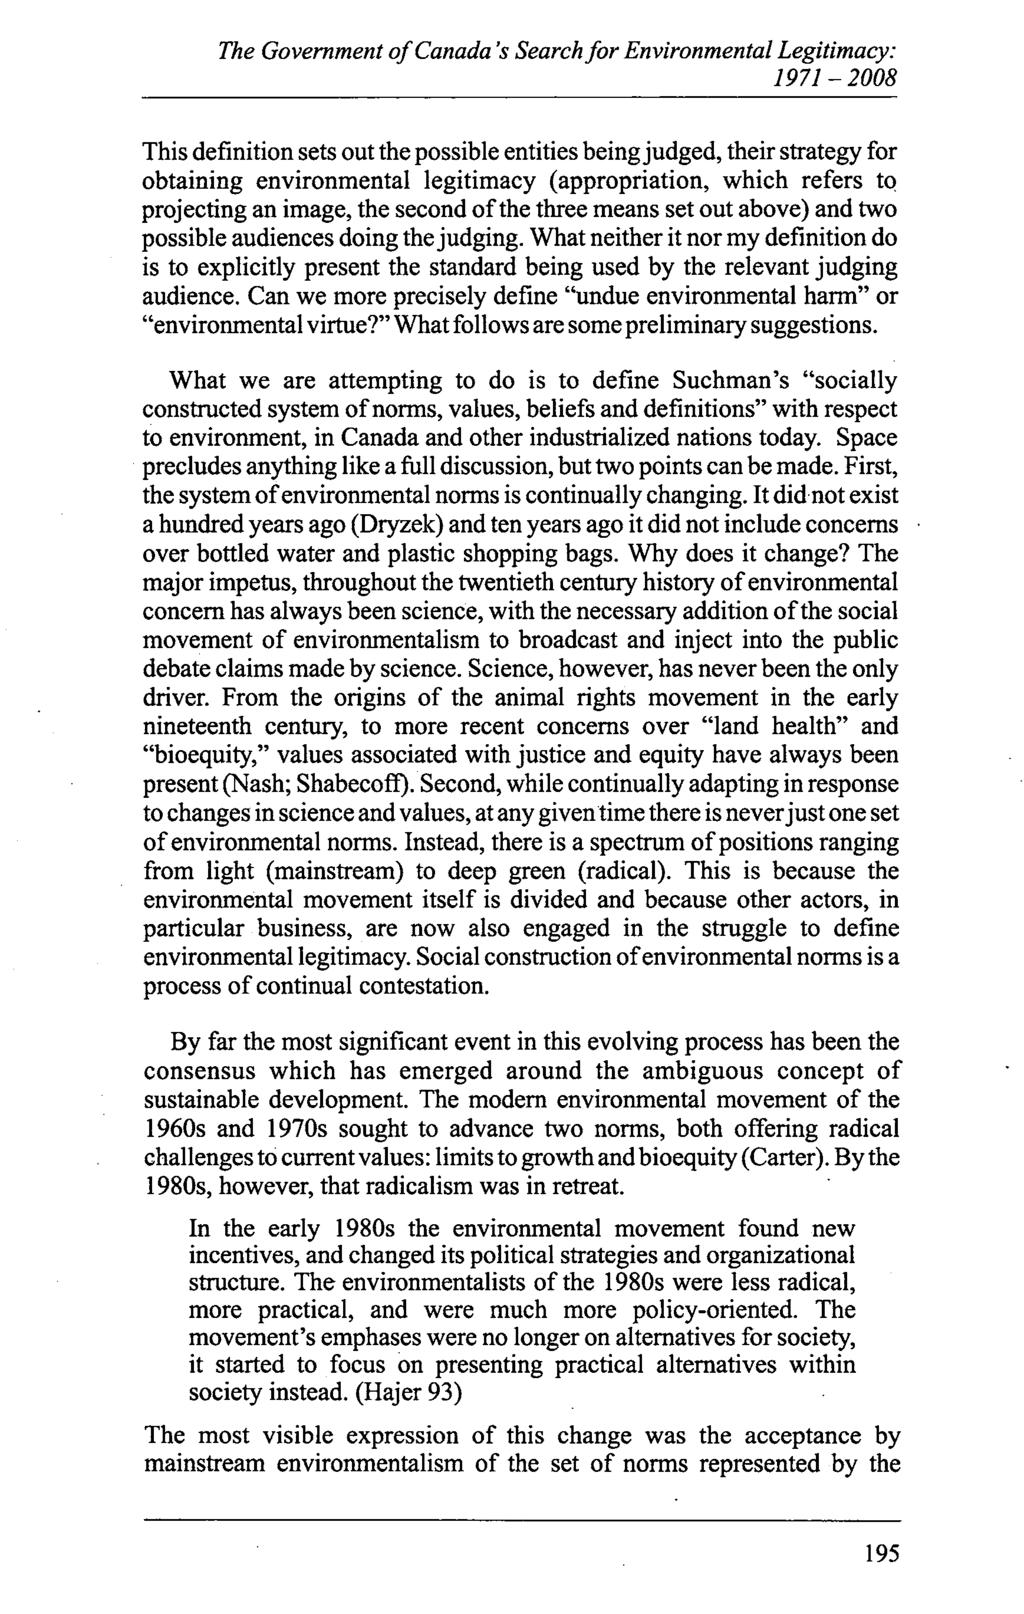 The Government of Canada's Search for Environmental Legitimacy: 1971-2008 This definition sets out the possible entities being judged, their strategy for obtaining environmental legitimacy